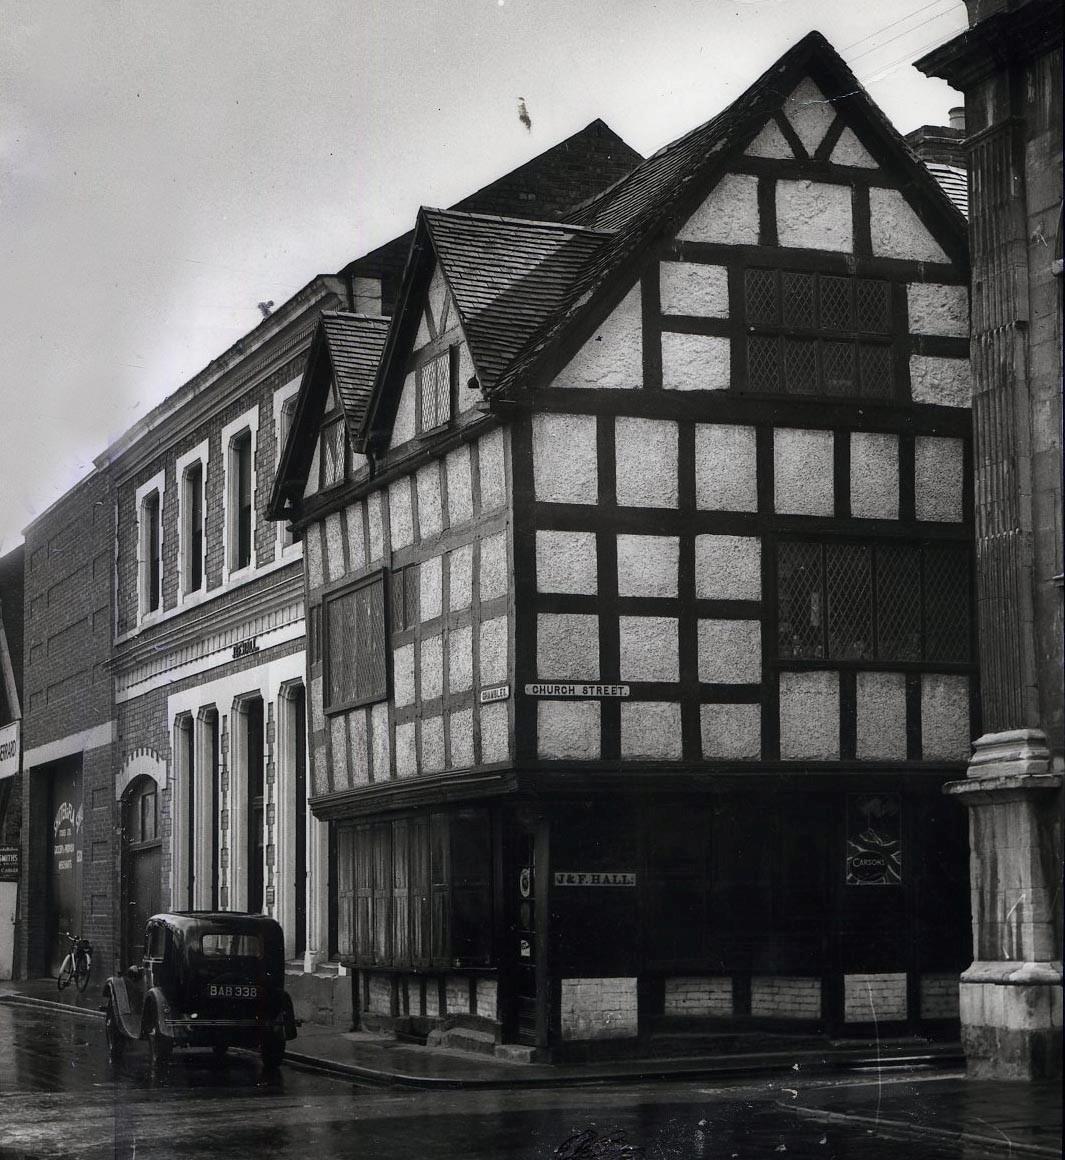 Vanished Worcester. A  view from the 1950s of the imposing half-timbered cornerstone shop of ironmongers J and F Hall in the Shambles. Its loss was much lamented after its 1960s demolition